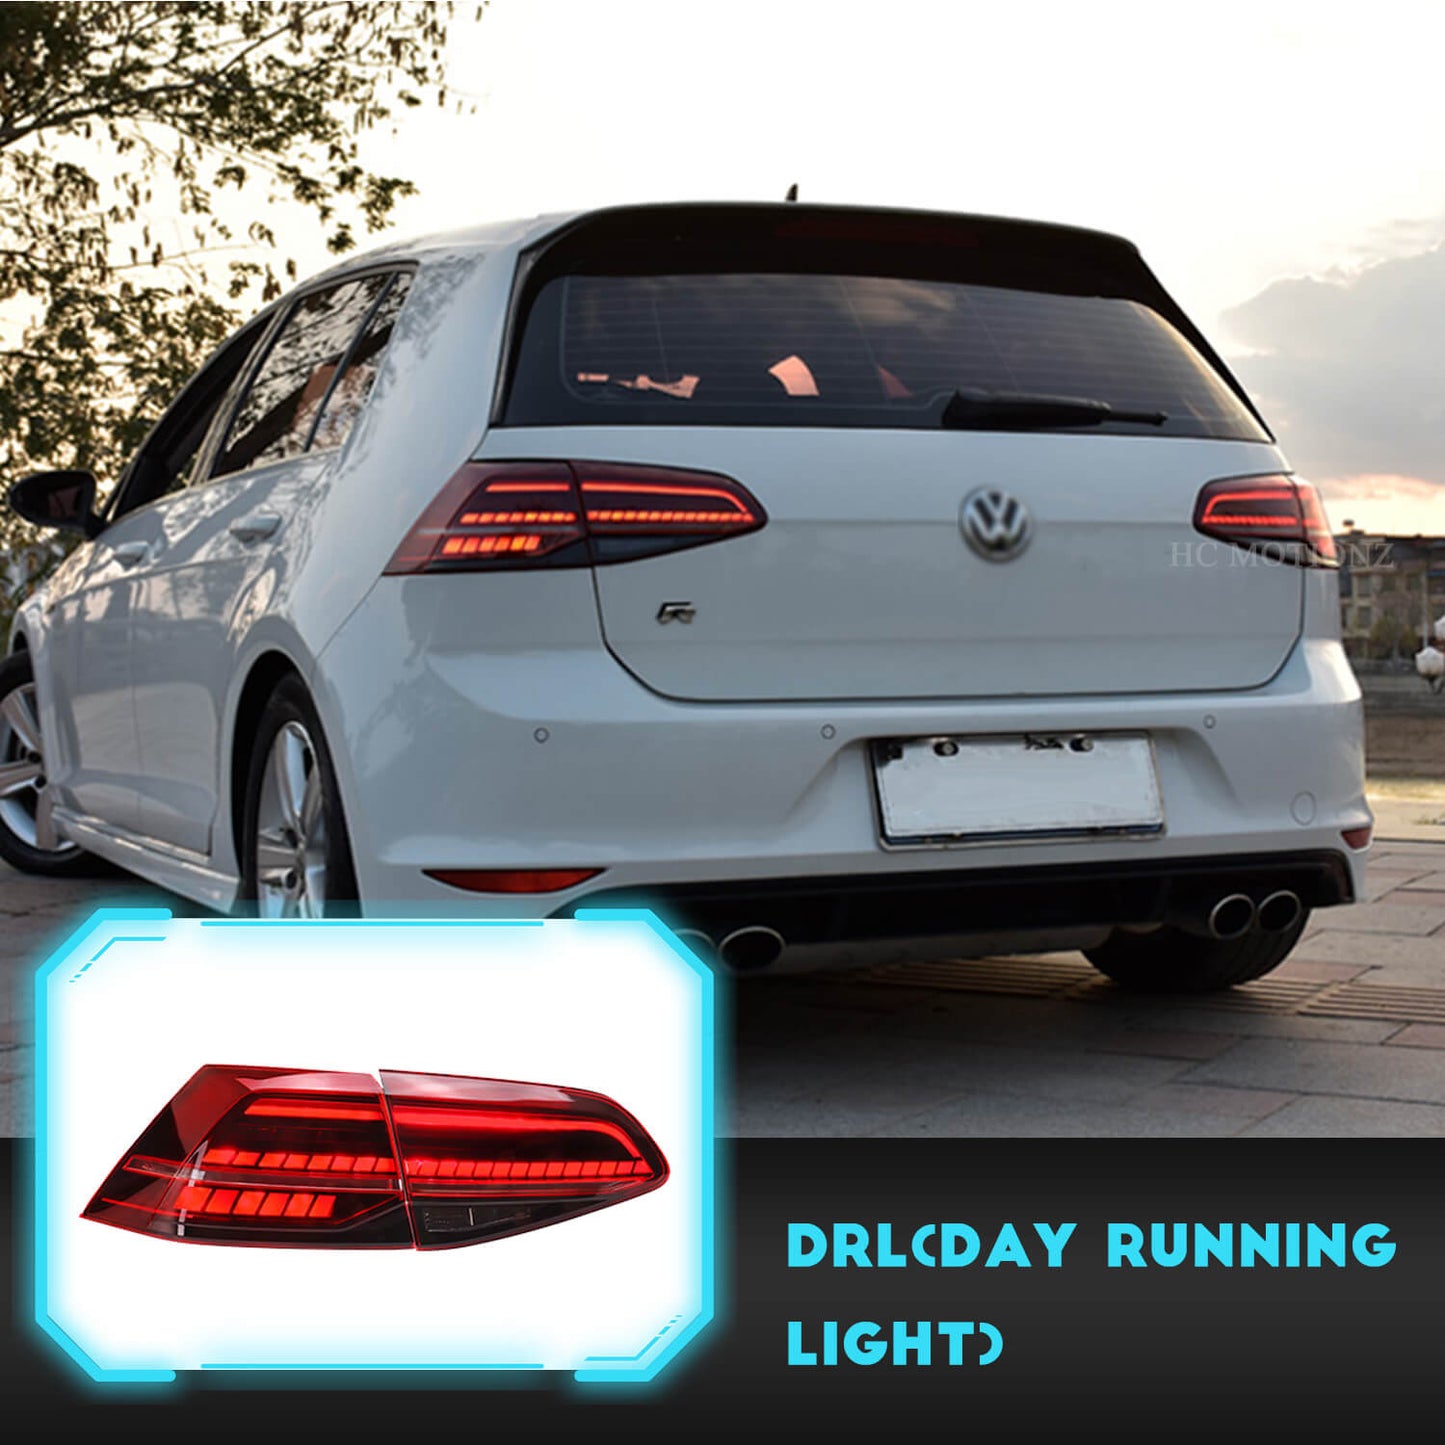 HCMOTION 2013-2020 LED Taillights For VW Golf MK7